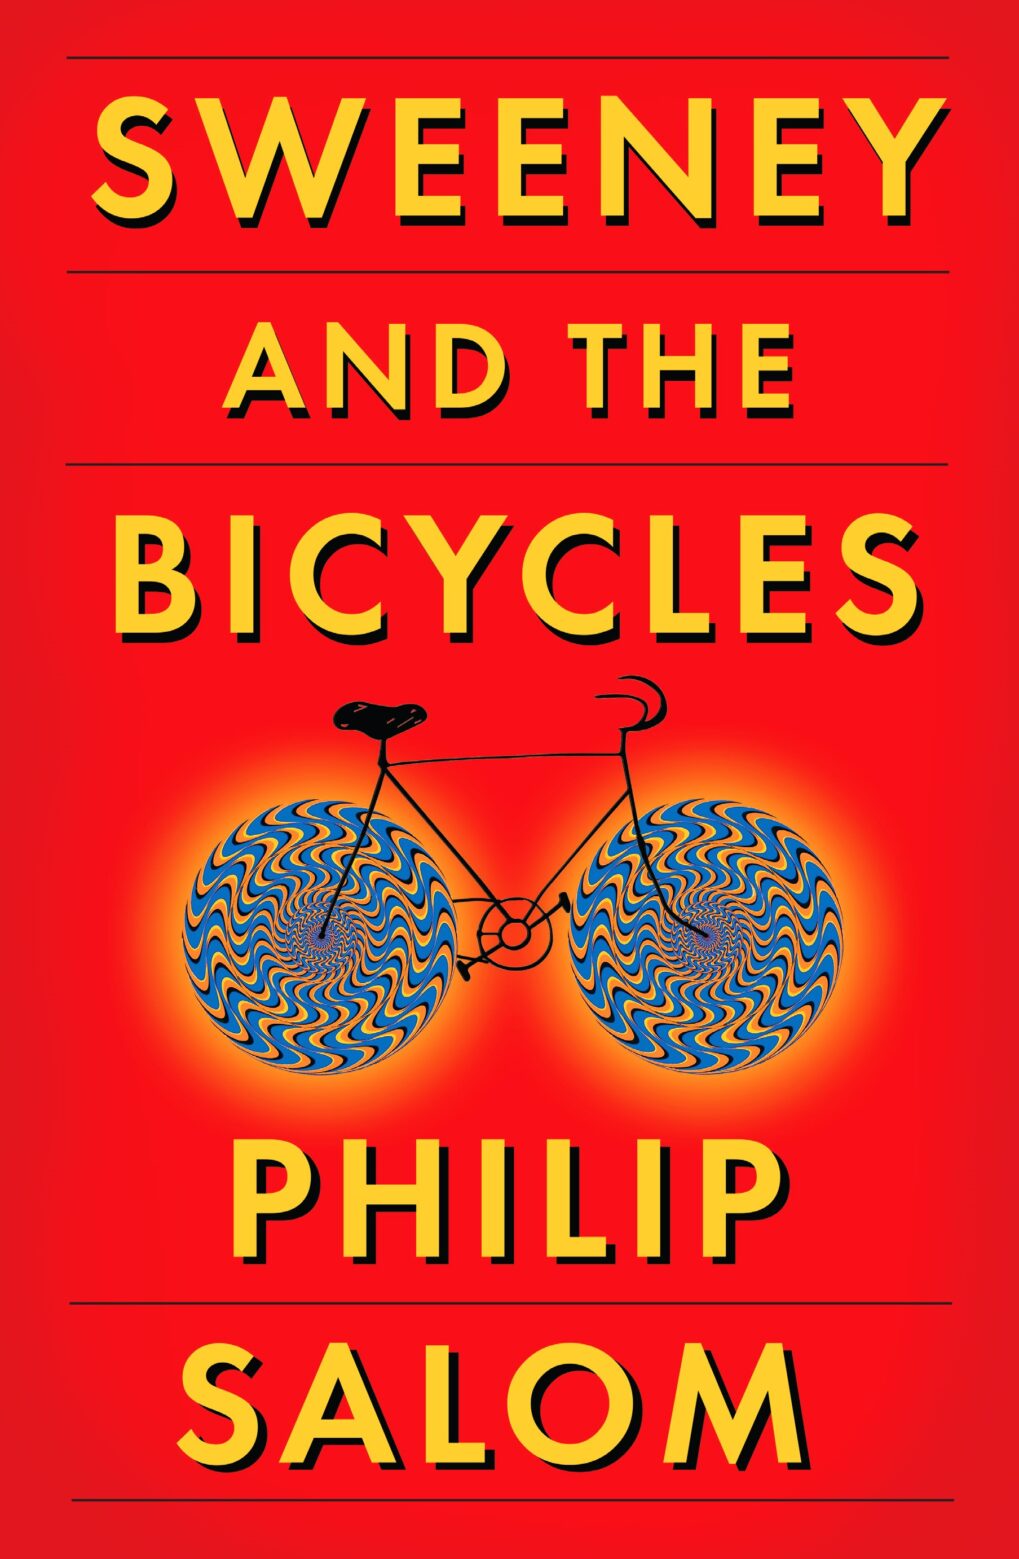 Sweeney and the Bicycles